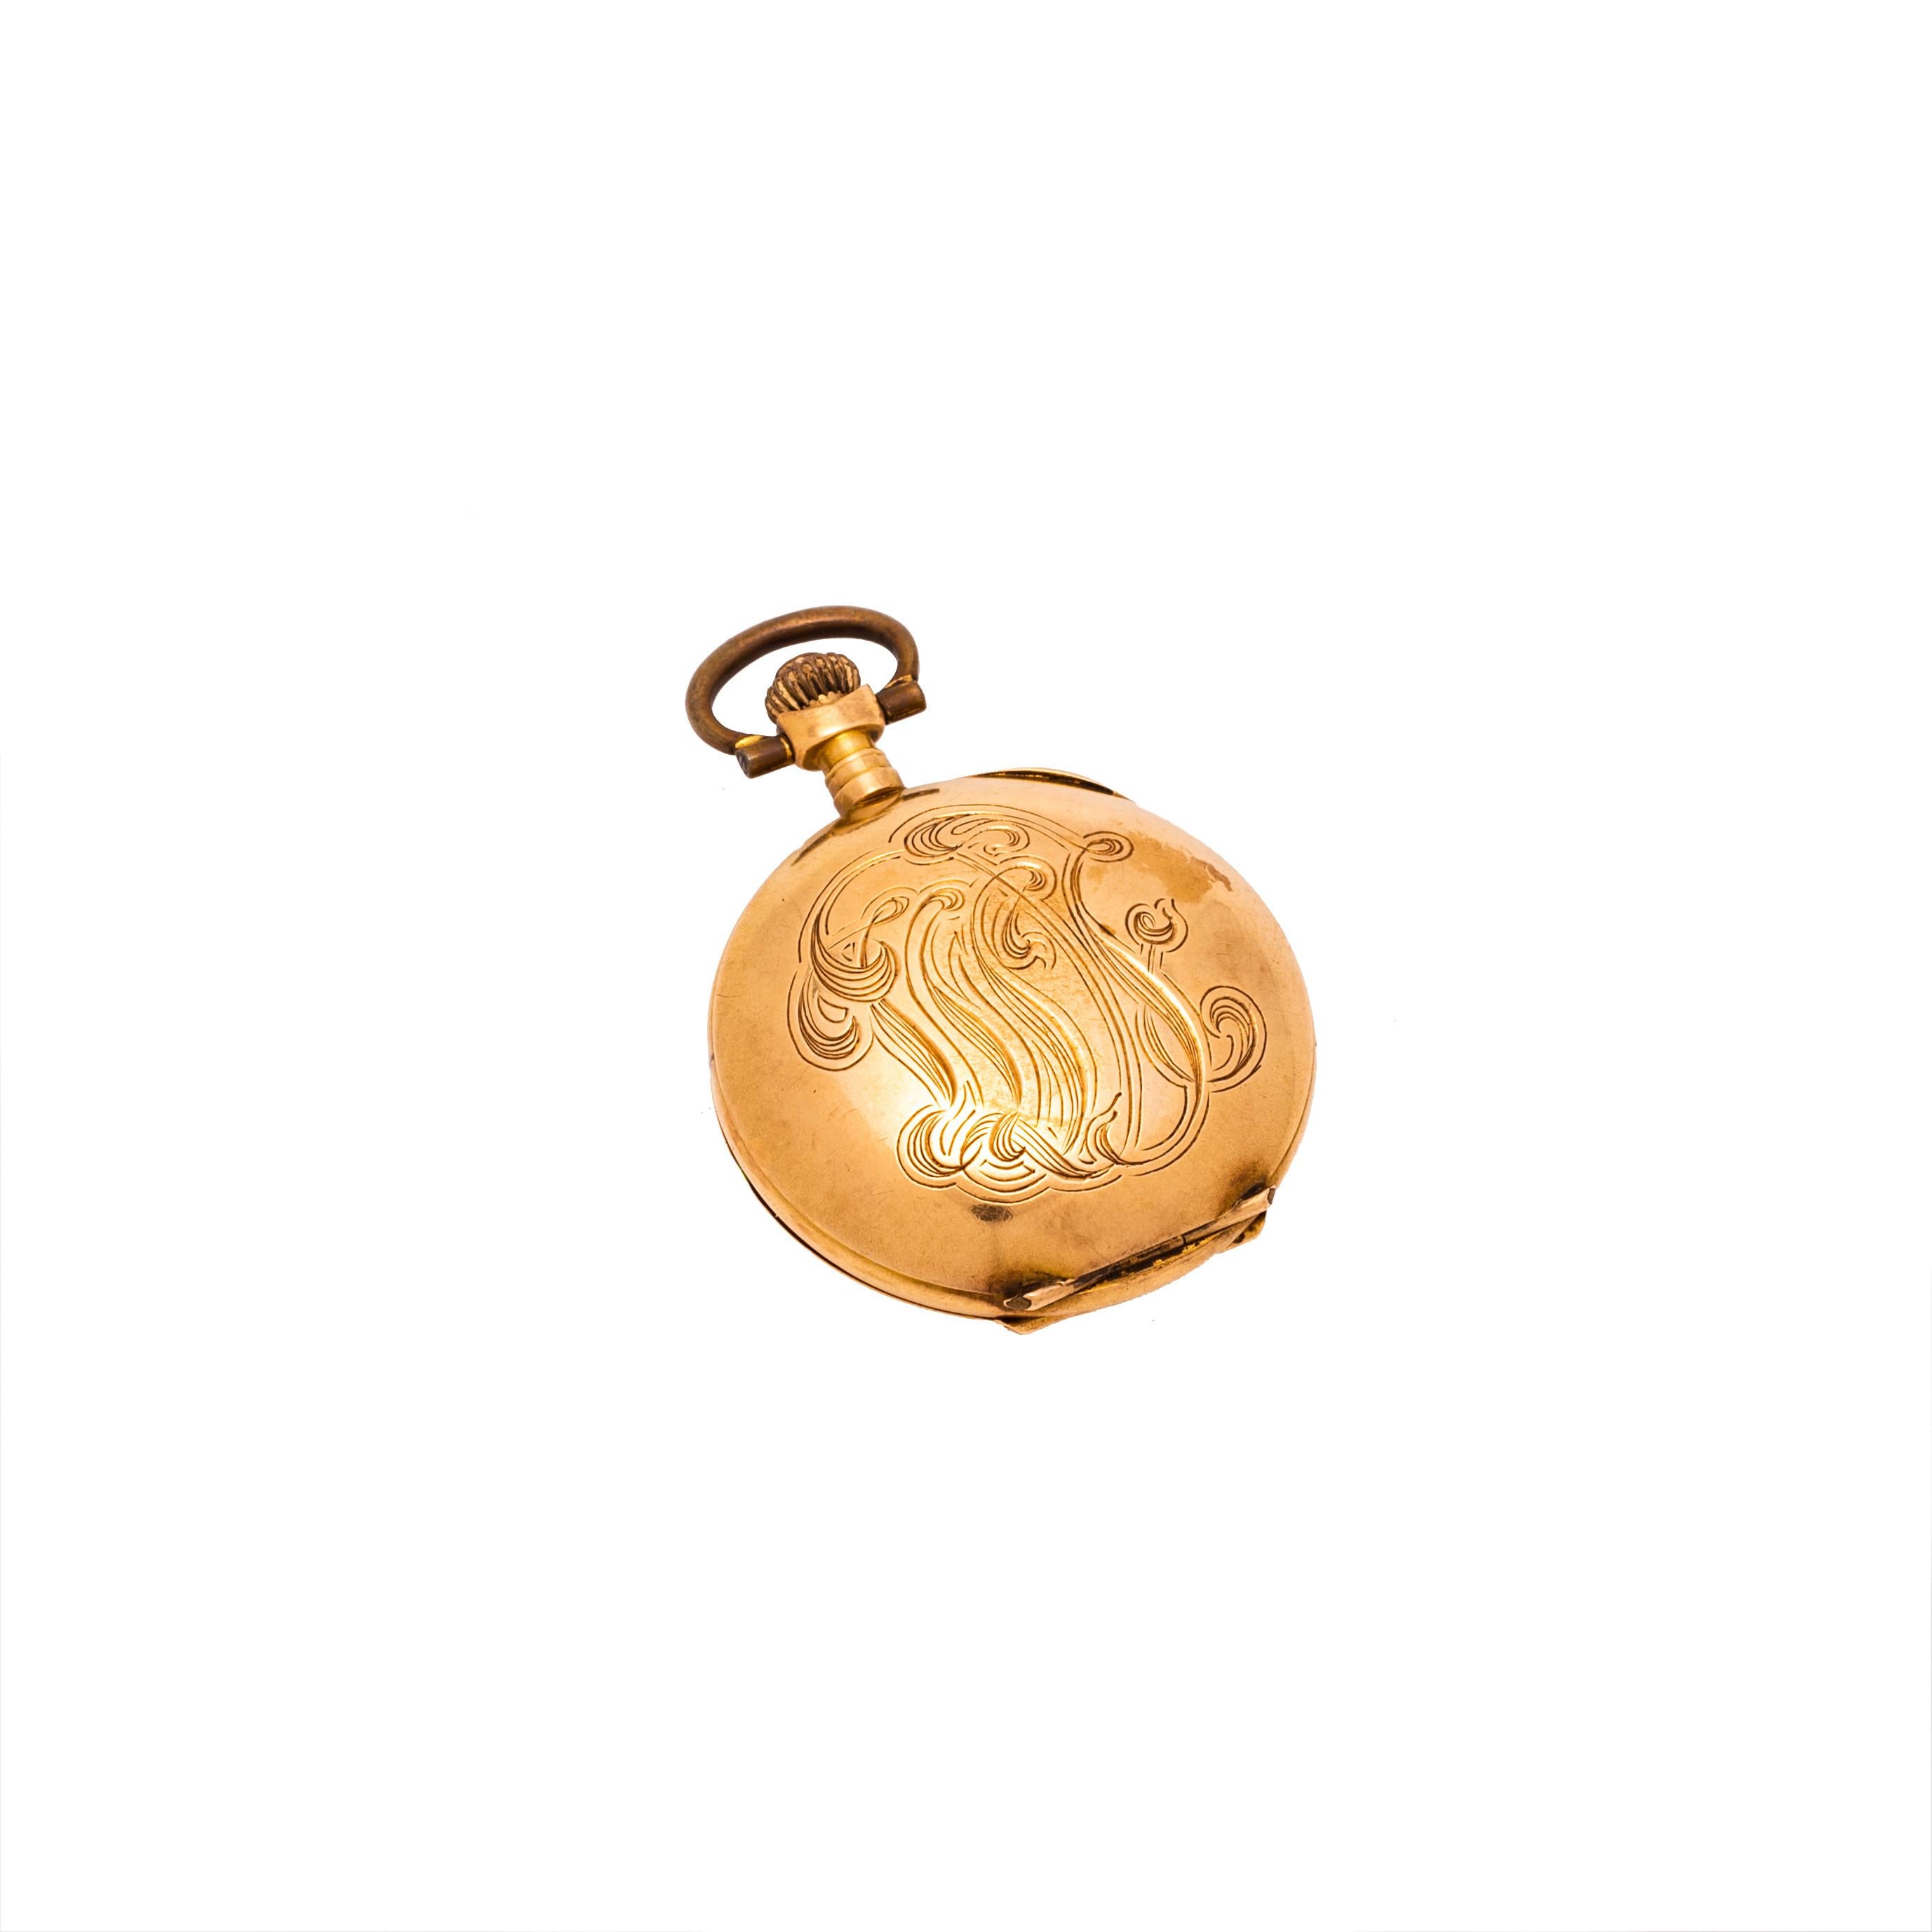 Ladies Pocket Watch 18kt Gold with bow motif on Front
not working
3 cm wide